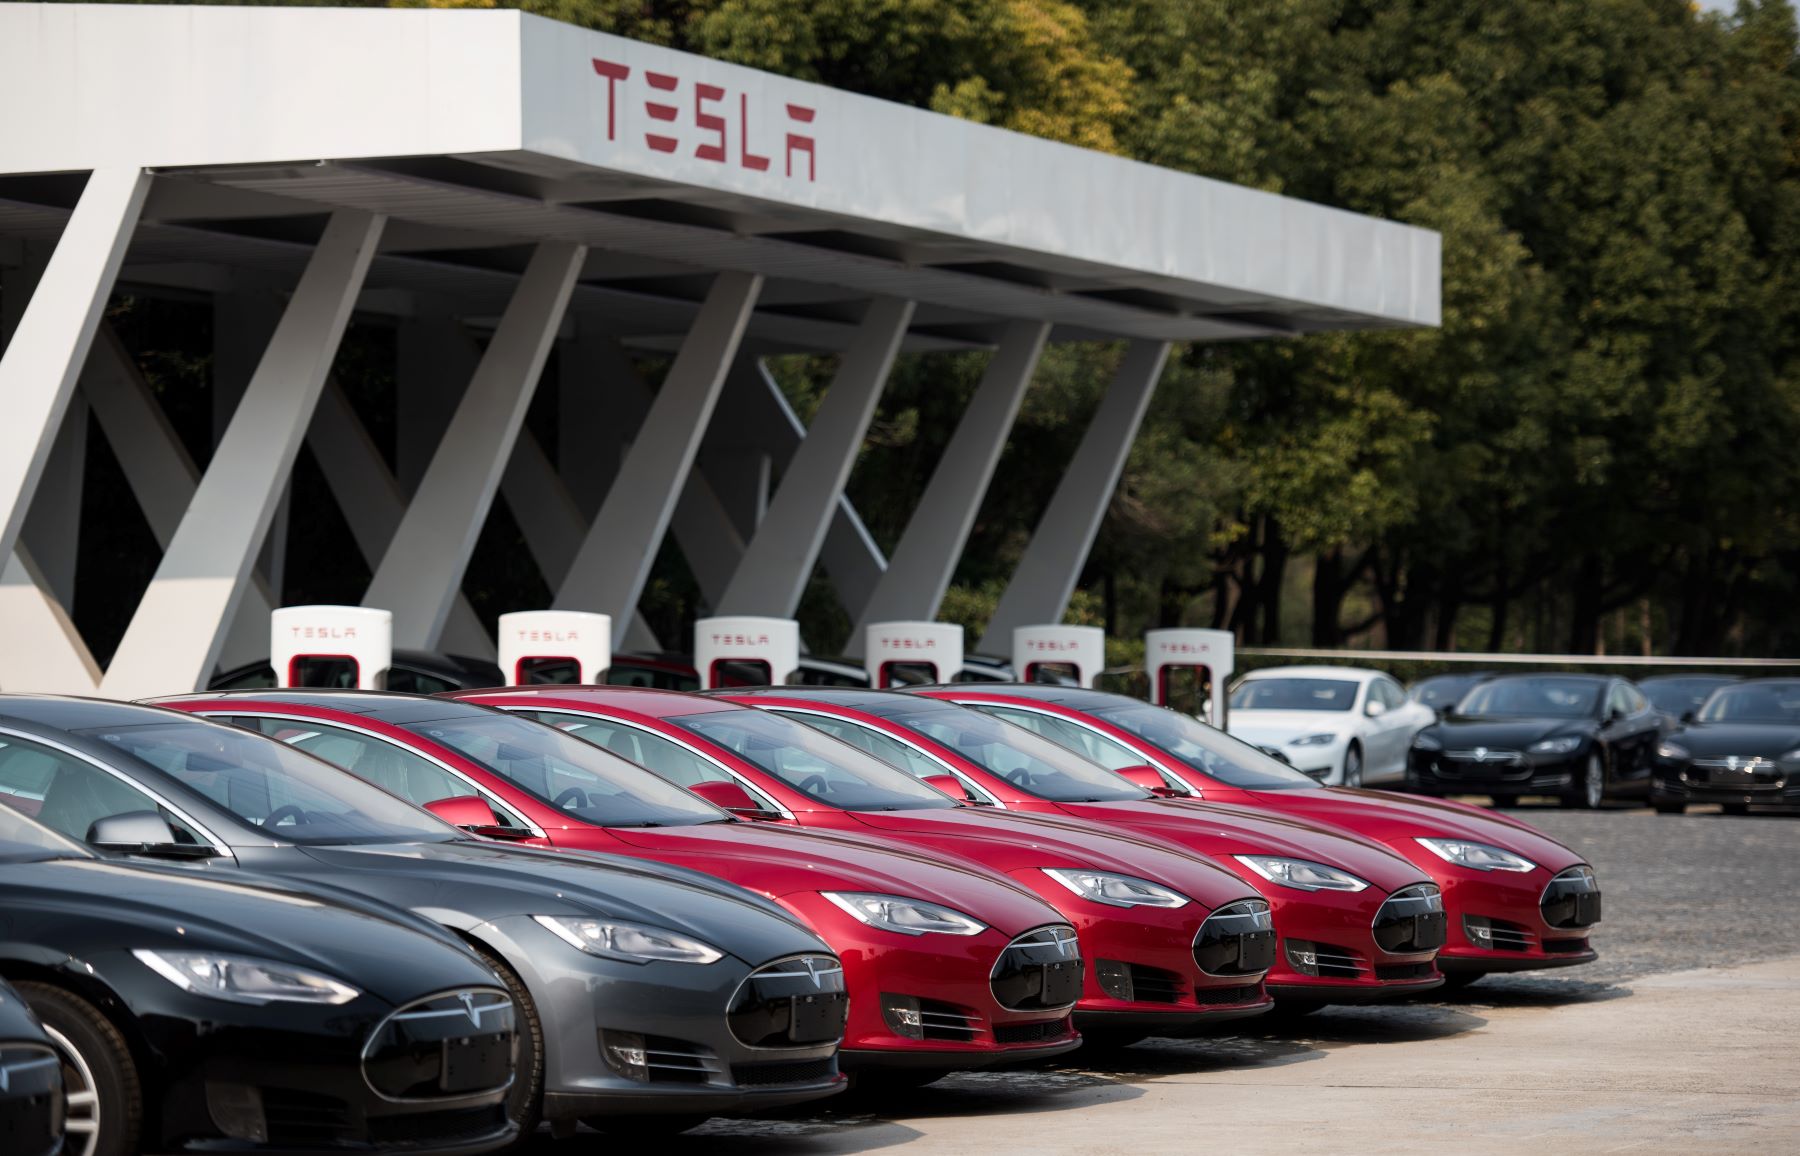 A Tesla dealership with a lineup of Model S vehicles in Shanghai, China